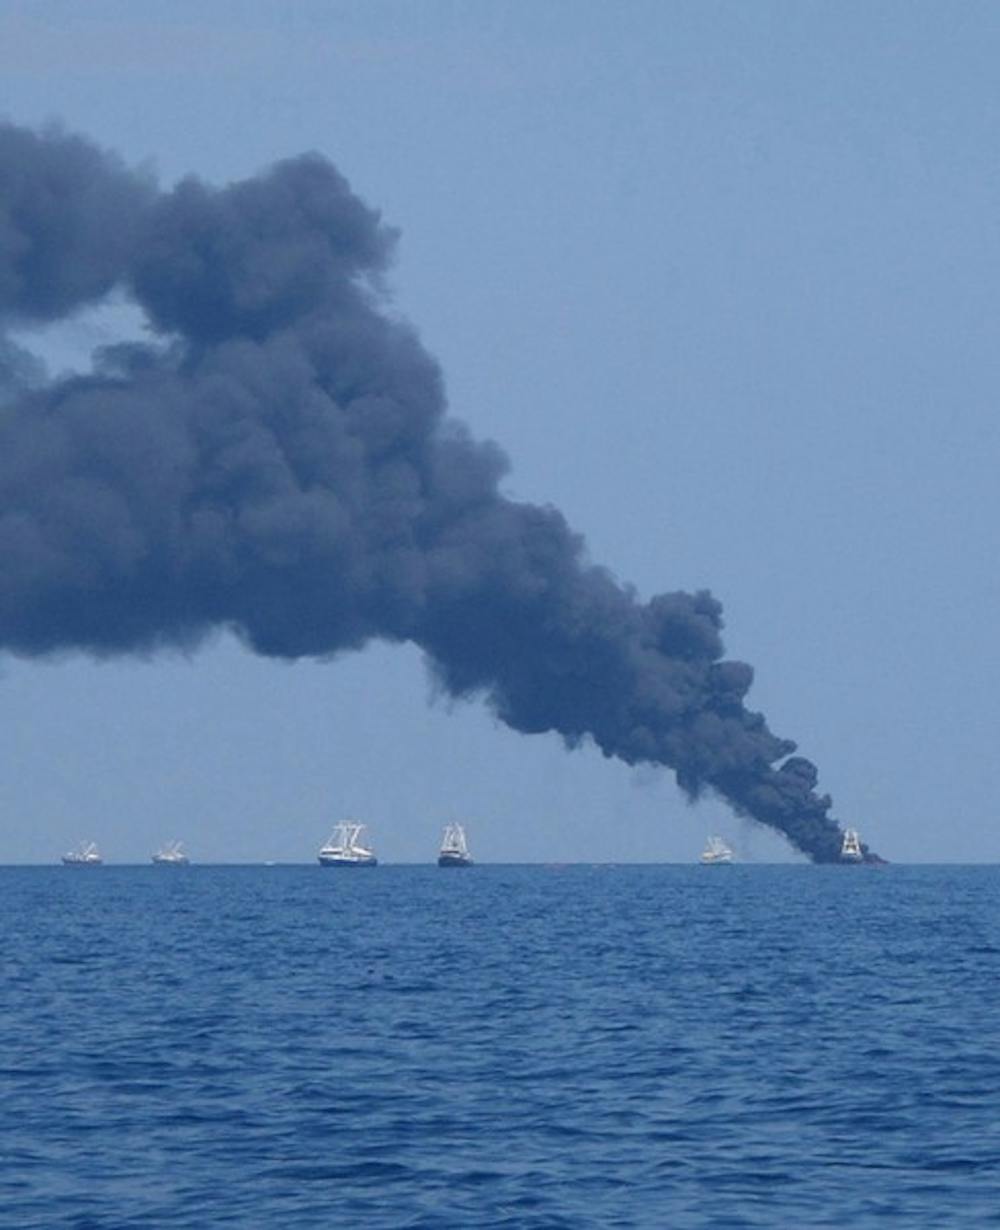 Surface oil from the BP oil spill in the Gulf of Mexico is burned off by teams of relief workers.